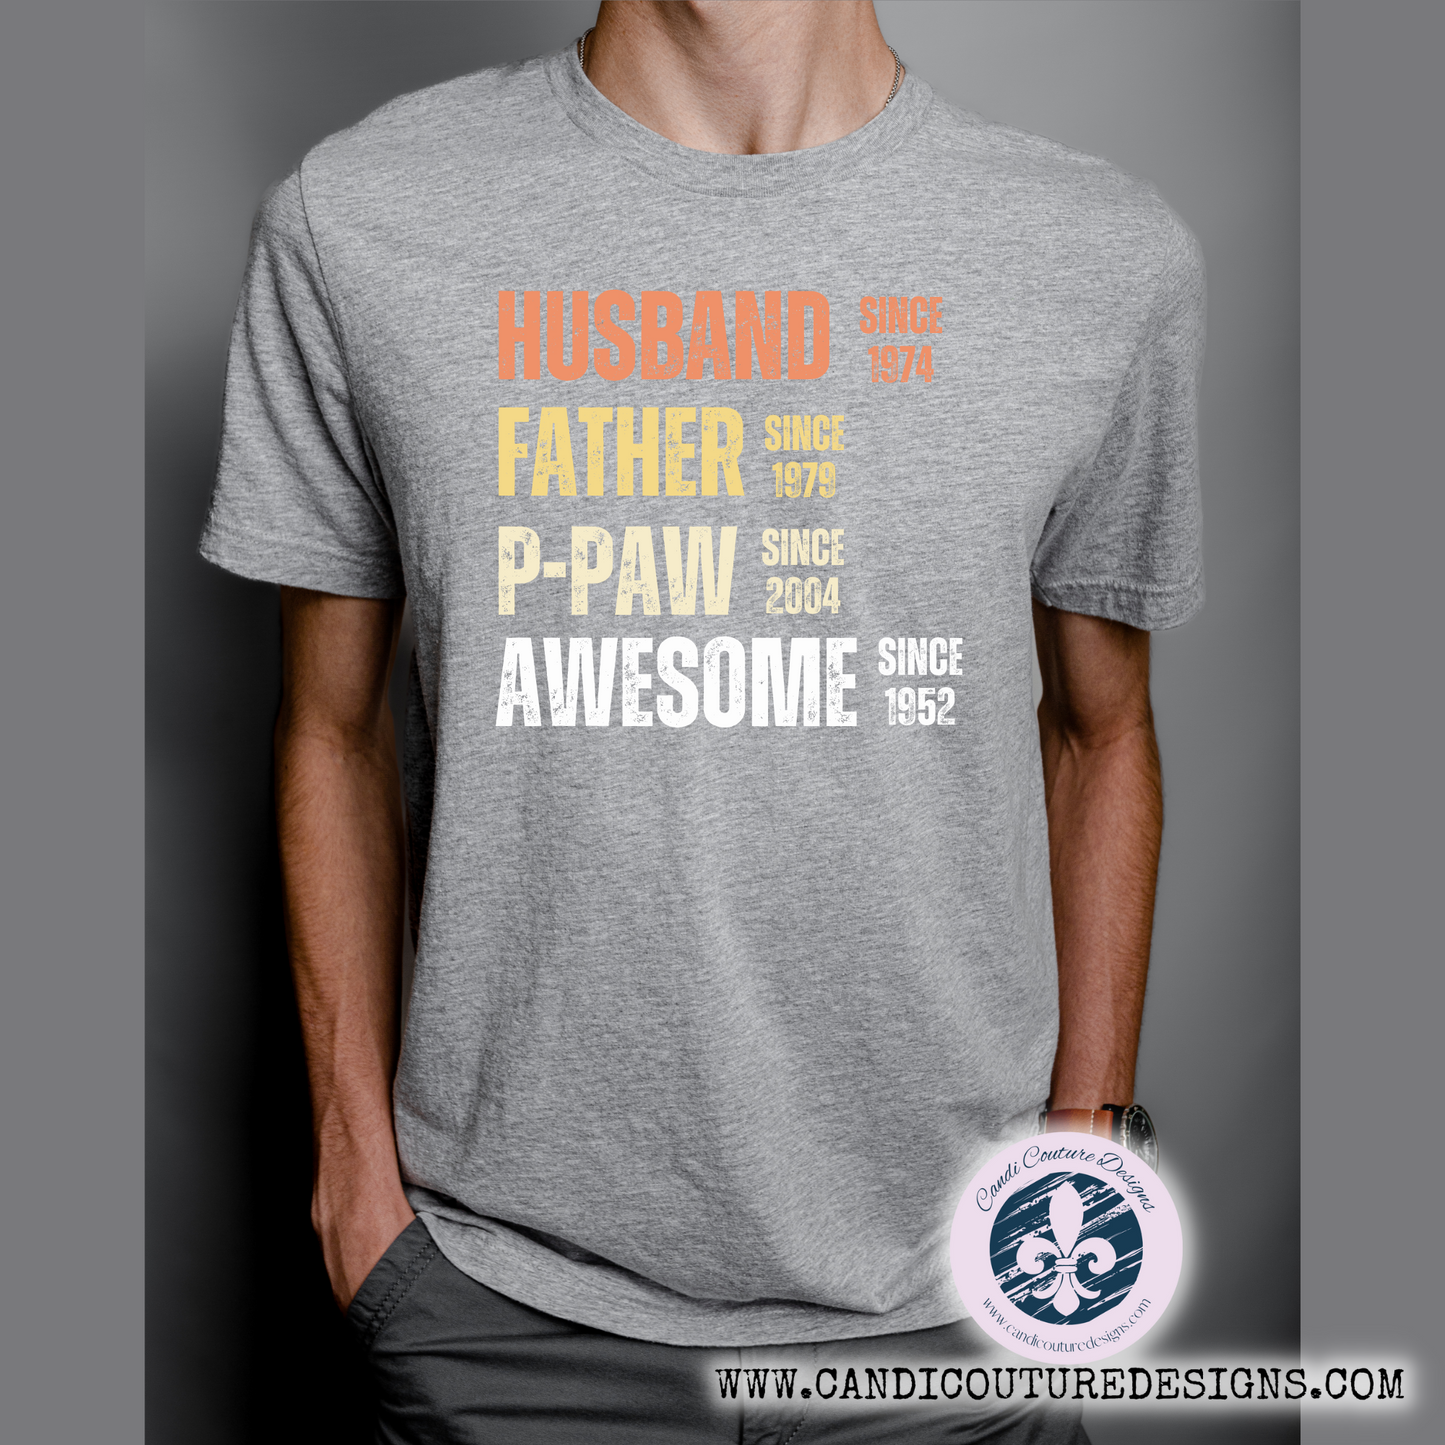 Husband Father Grandpa Awesome Graphic Tee | Father's Day Gift